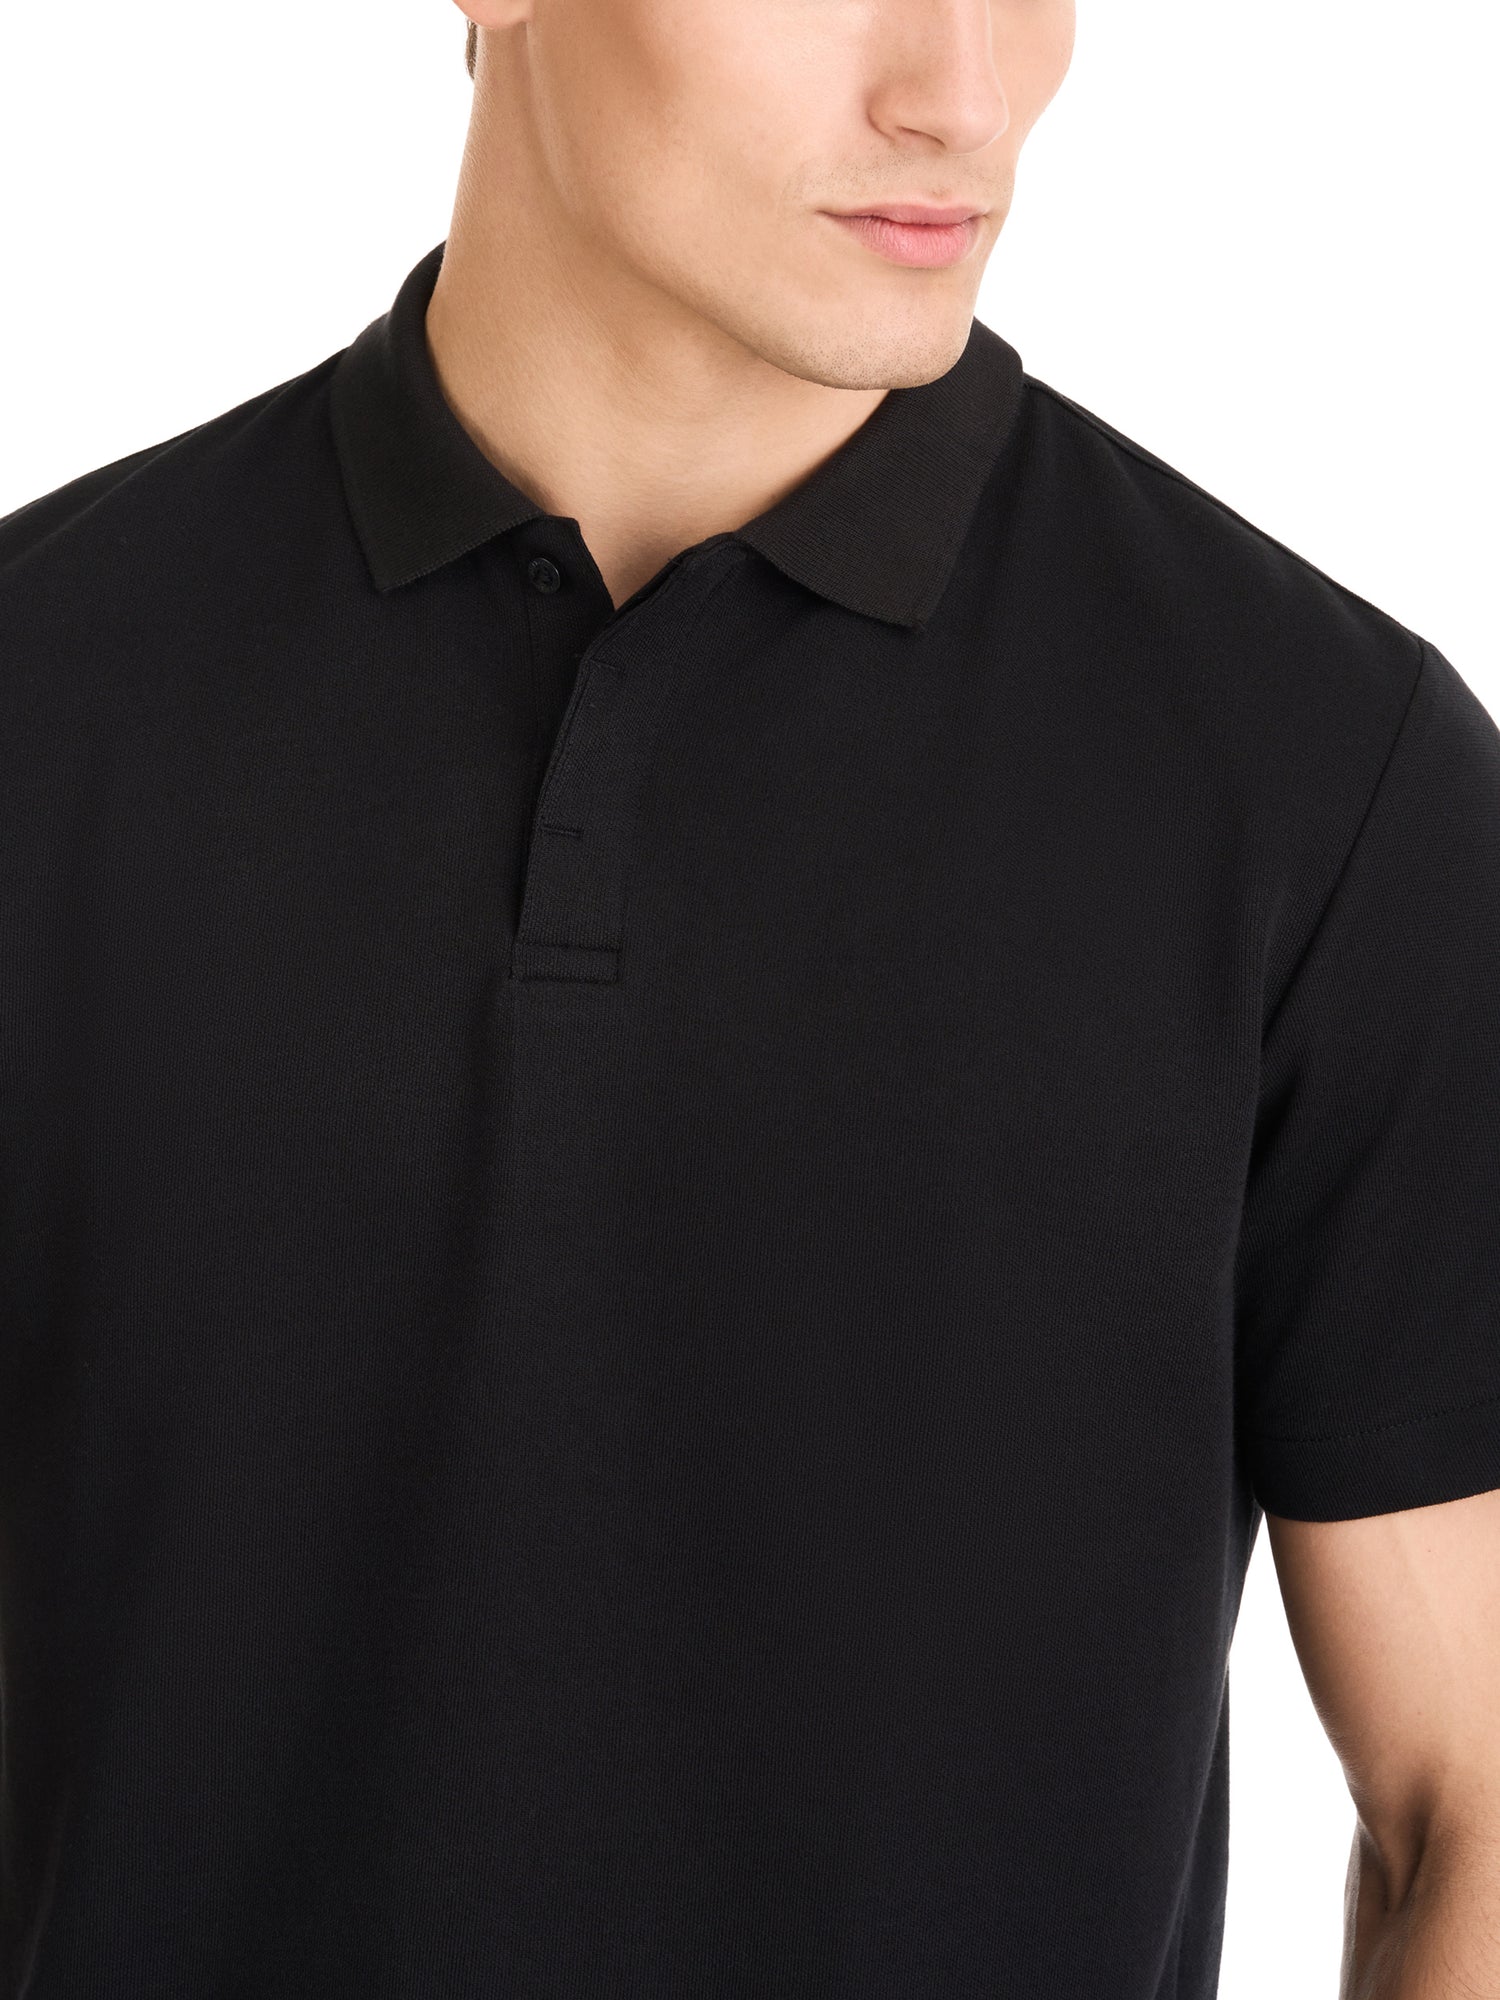 Essential Stain Shield Honeycomb Polo